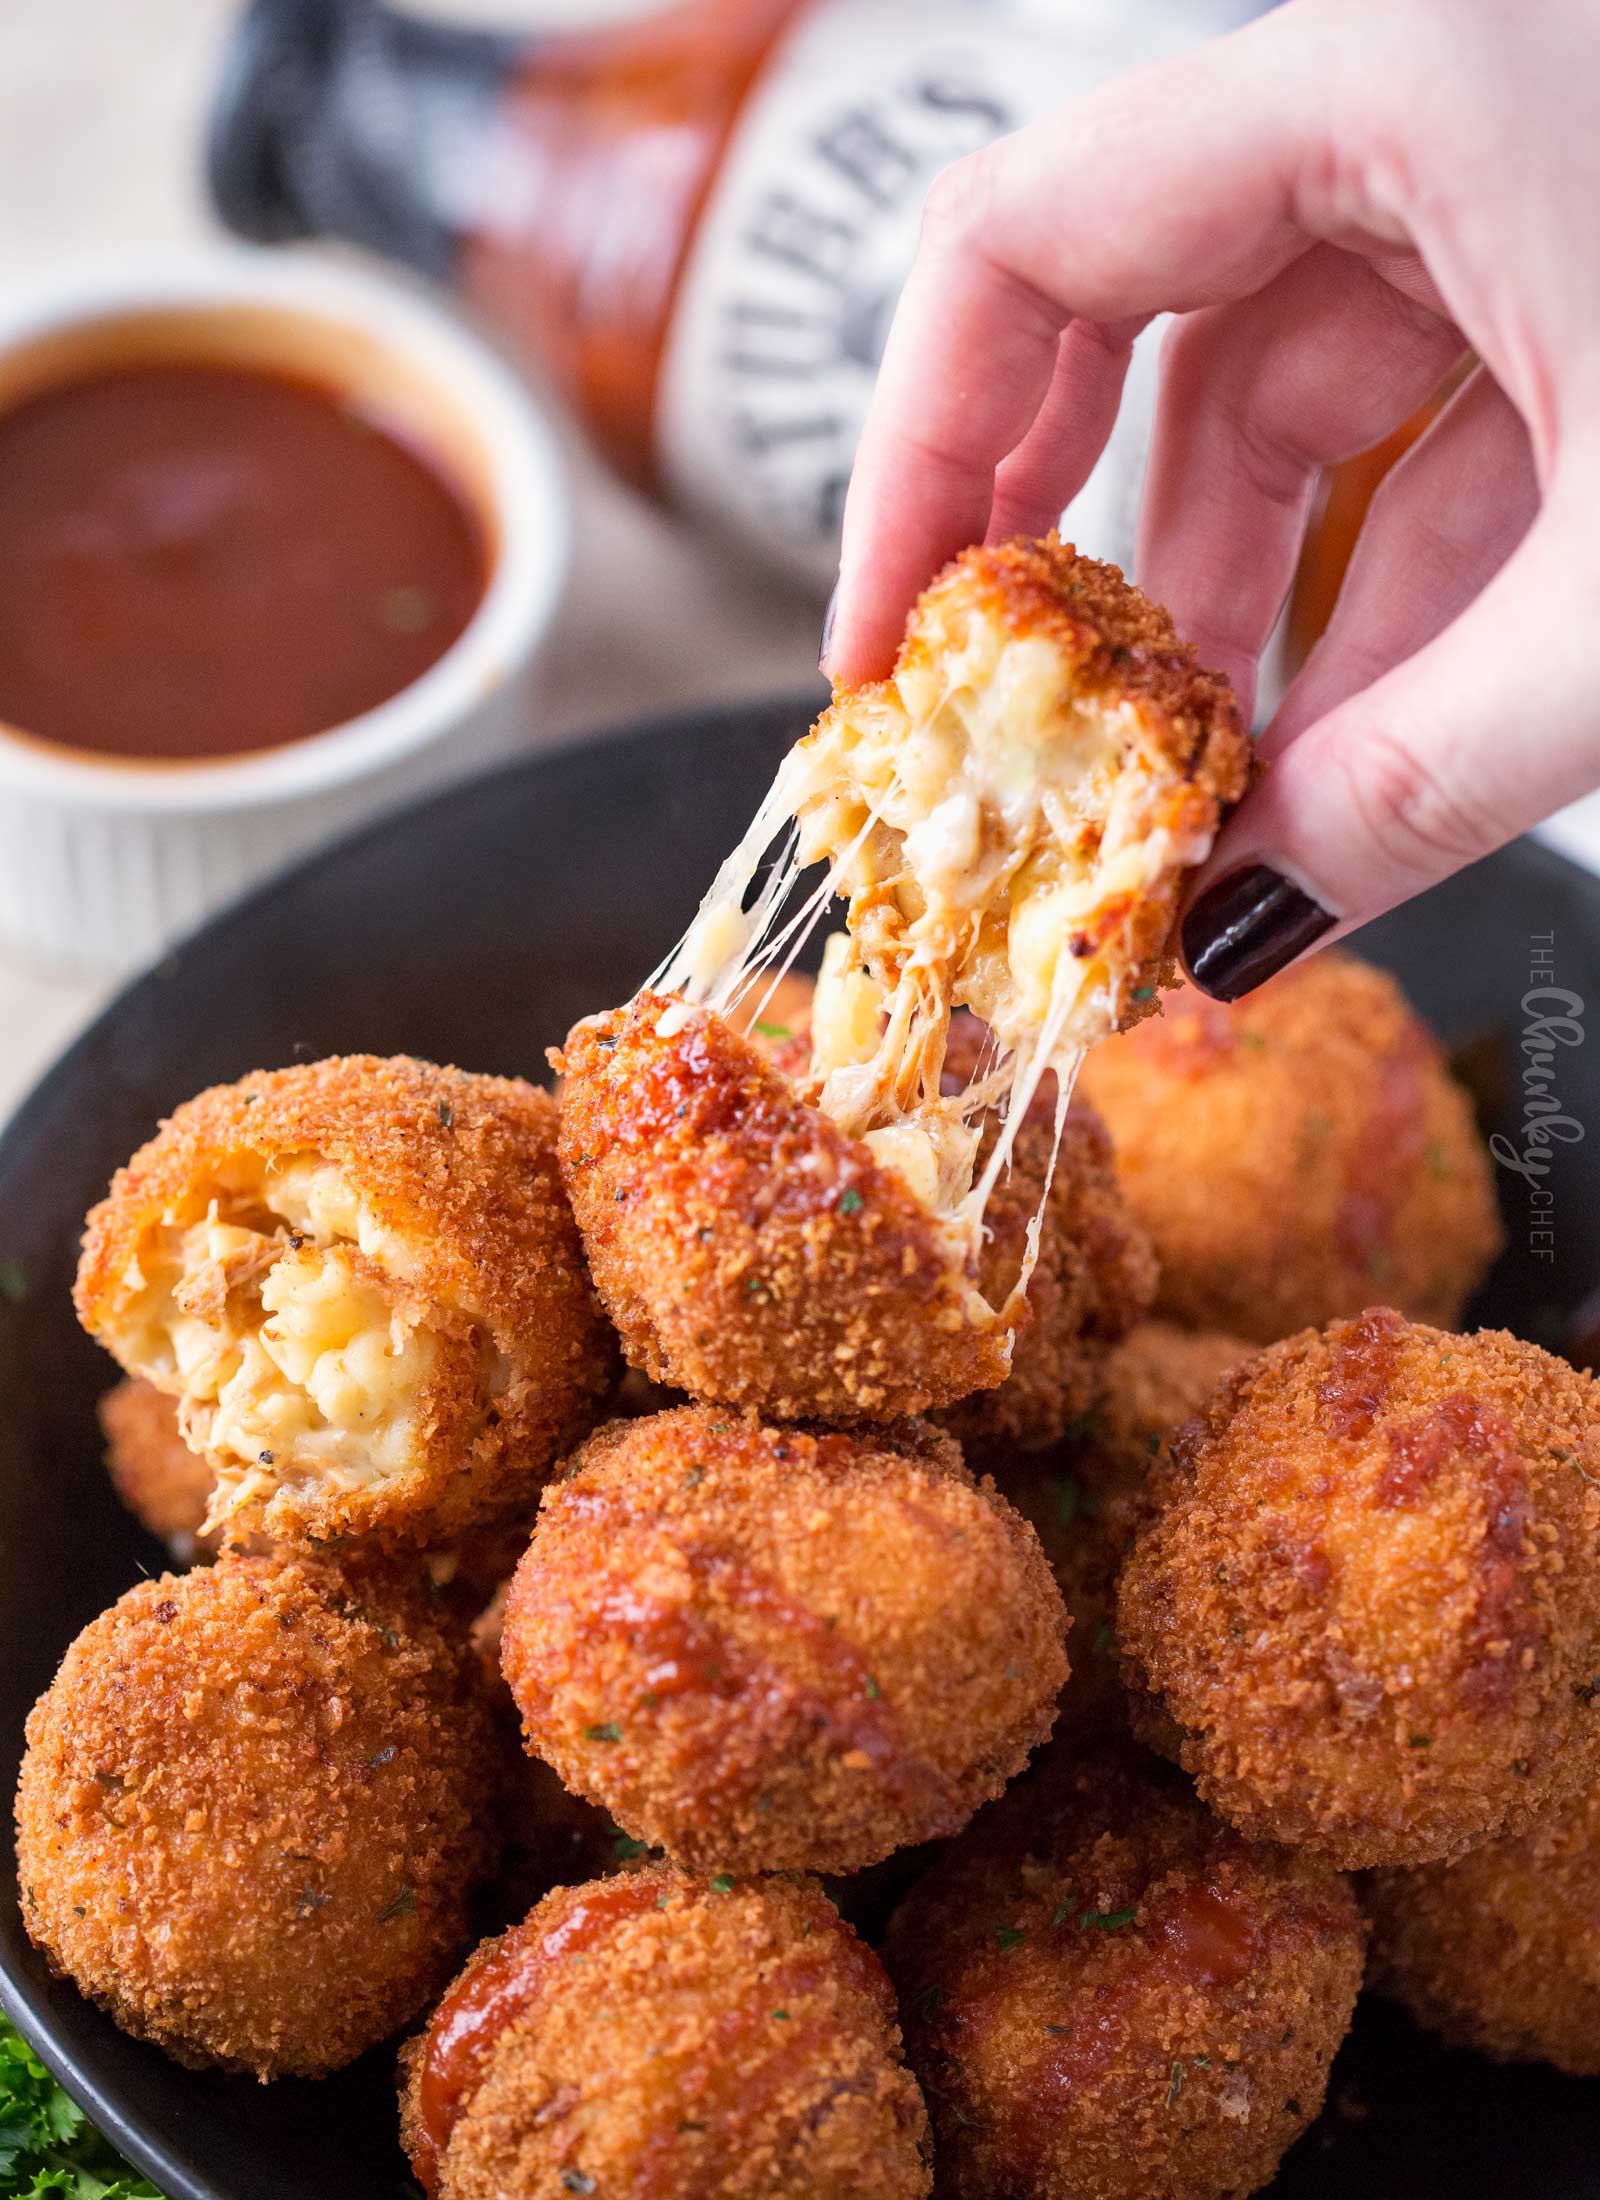 Picture of fried mac and cheese bite being pulled apart with gooey cheese